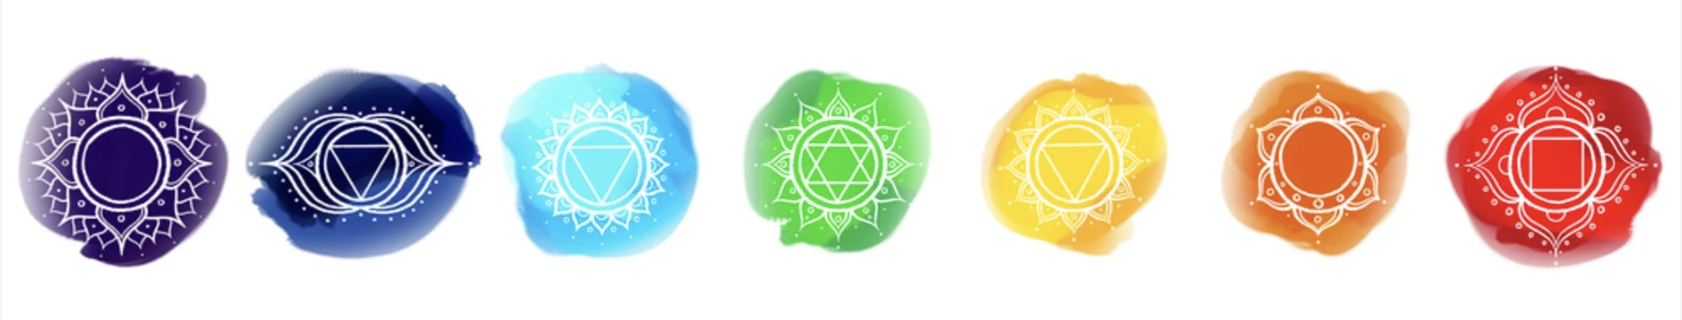 A row of vibrant chakra symbols, each representing a different energy center in the body. From the root chakra at the base, to the crown chakra at the top, the chakras are depicted in their respective colors, creating a colorful and harmonious rainbow